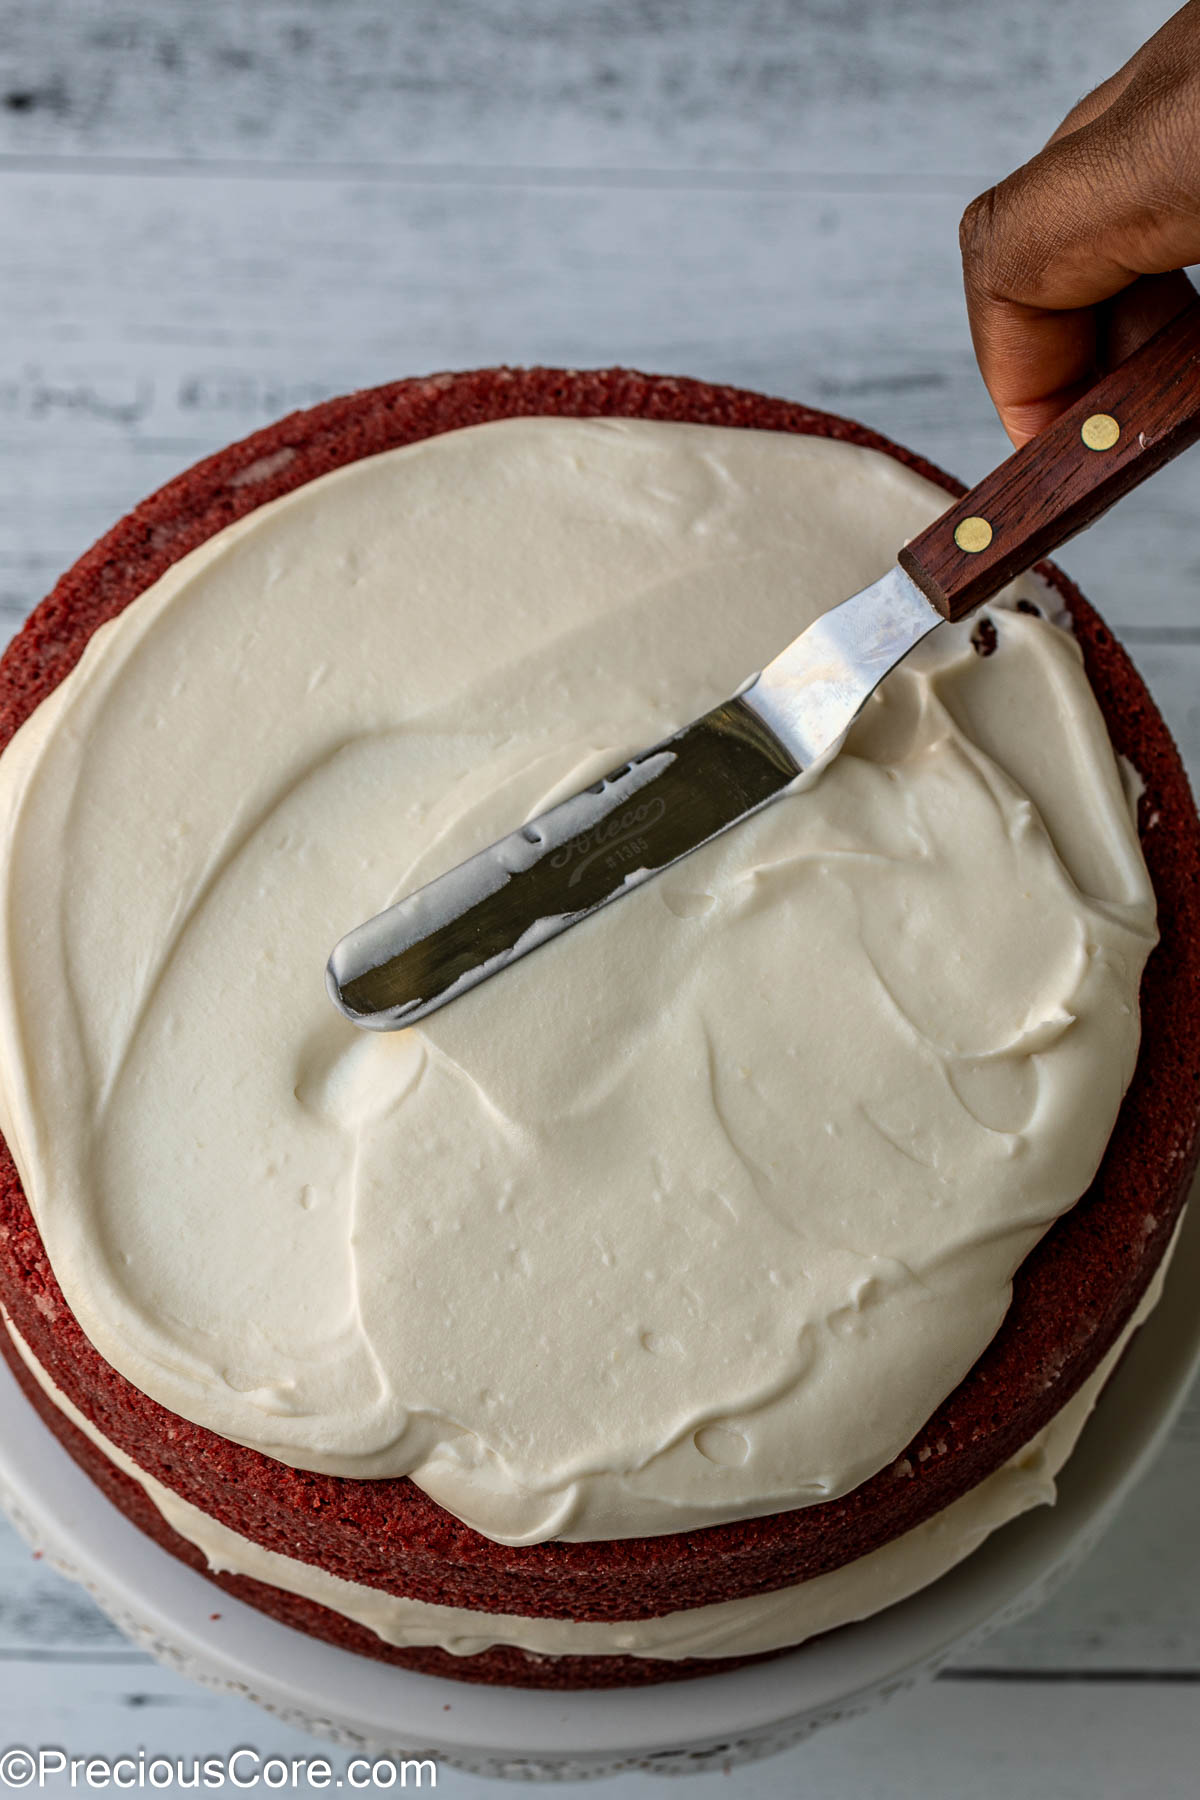 Frosting on the second layer of cake.